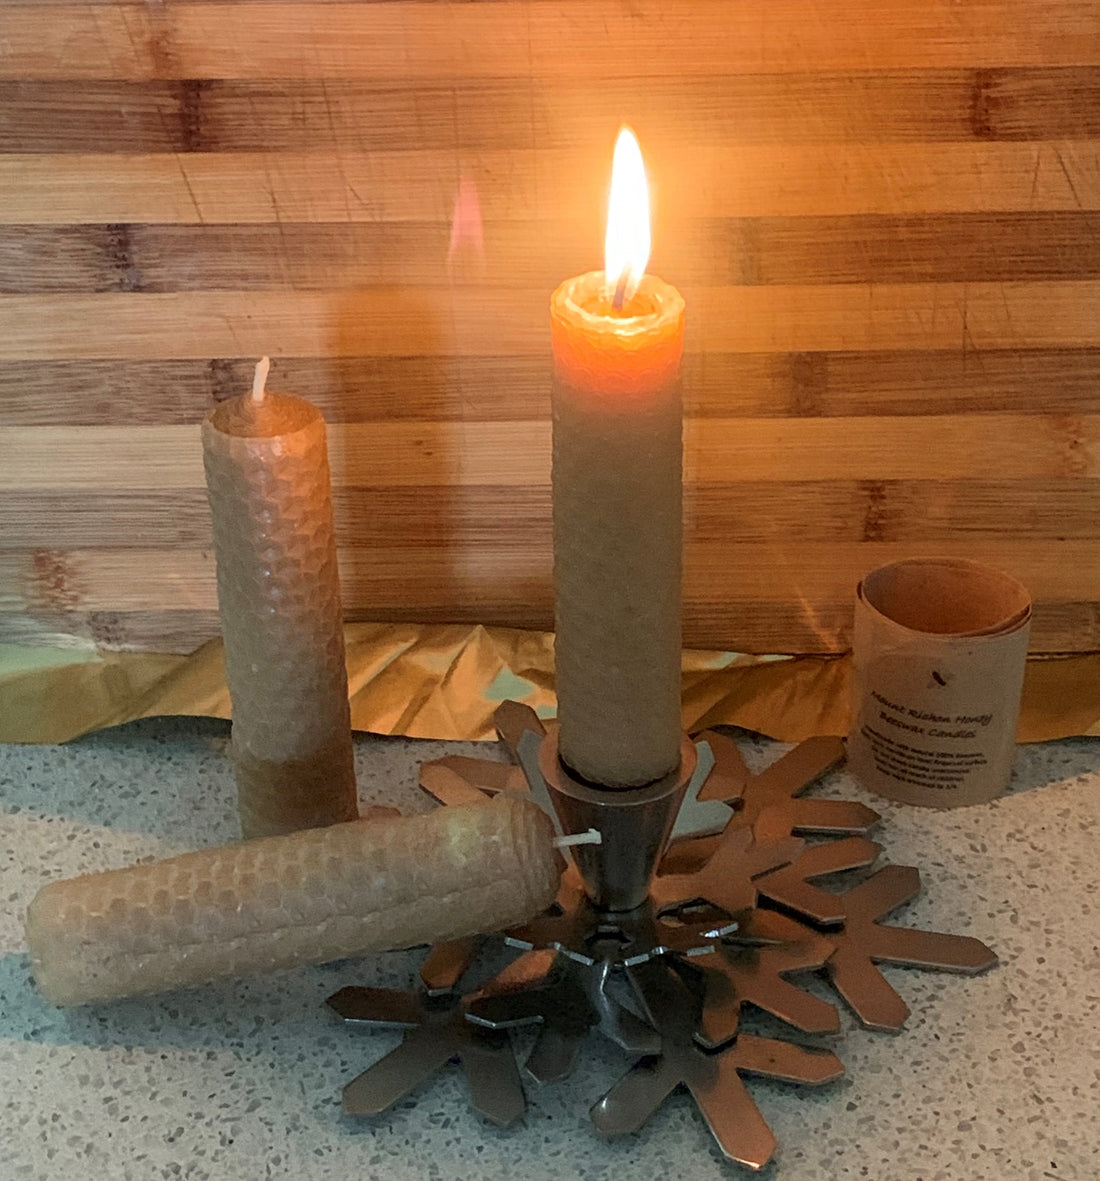 10 Good Reasons Why You Should Switch to Beeswax Candles